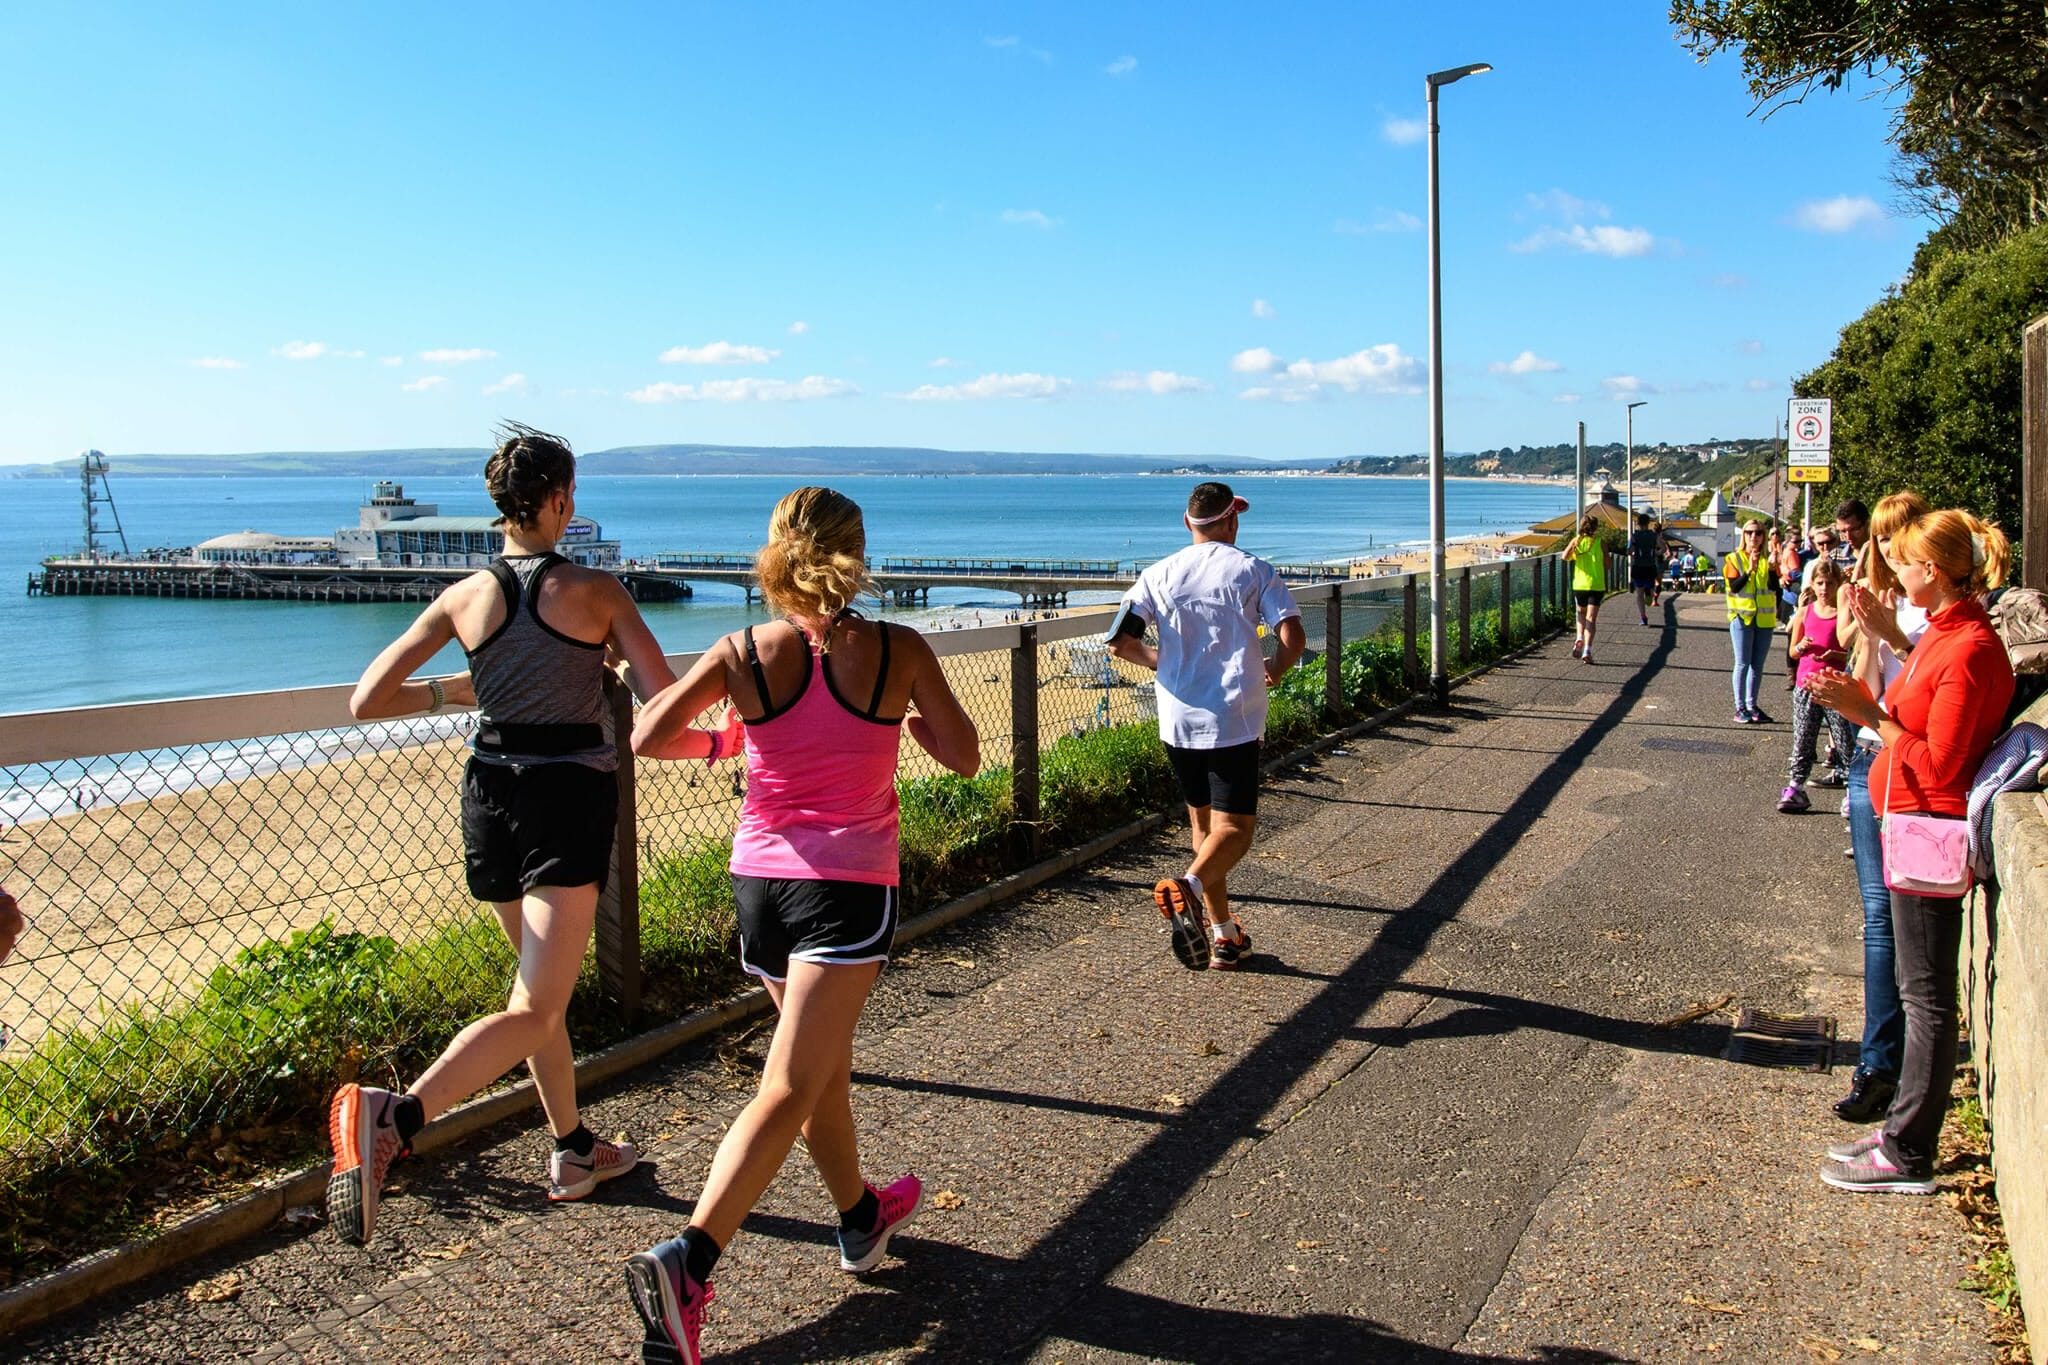 Run Bournemouth is a great opportunity to visit the seaside